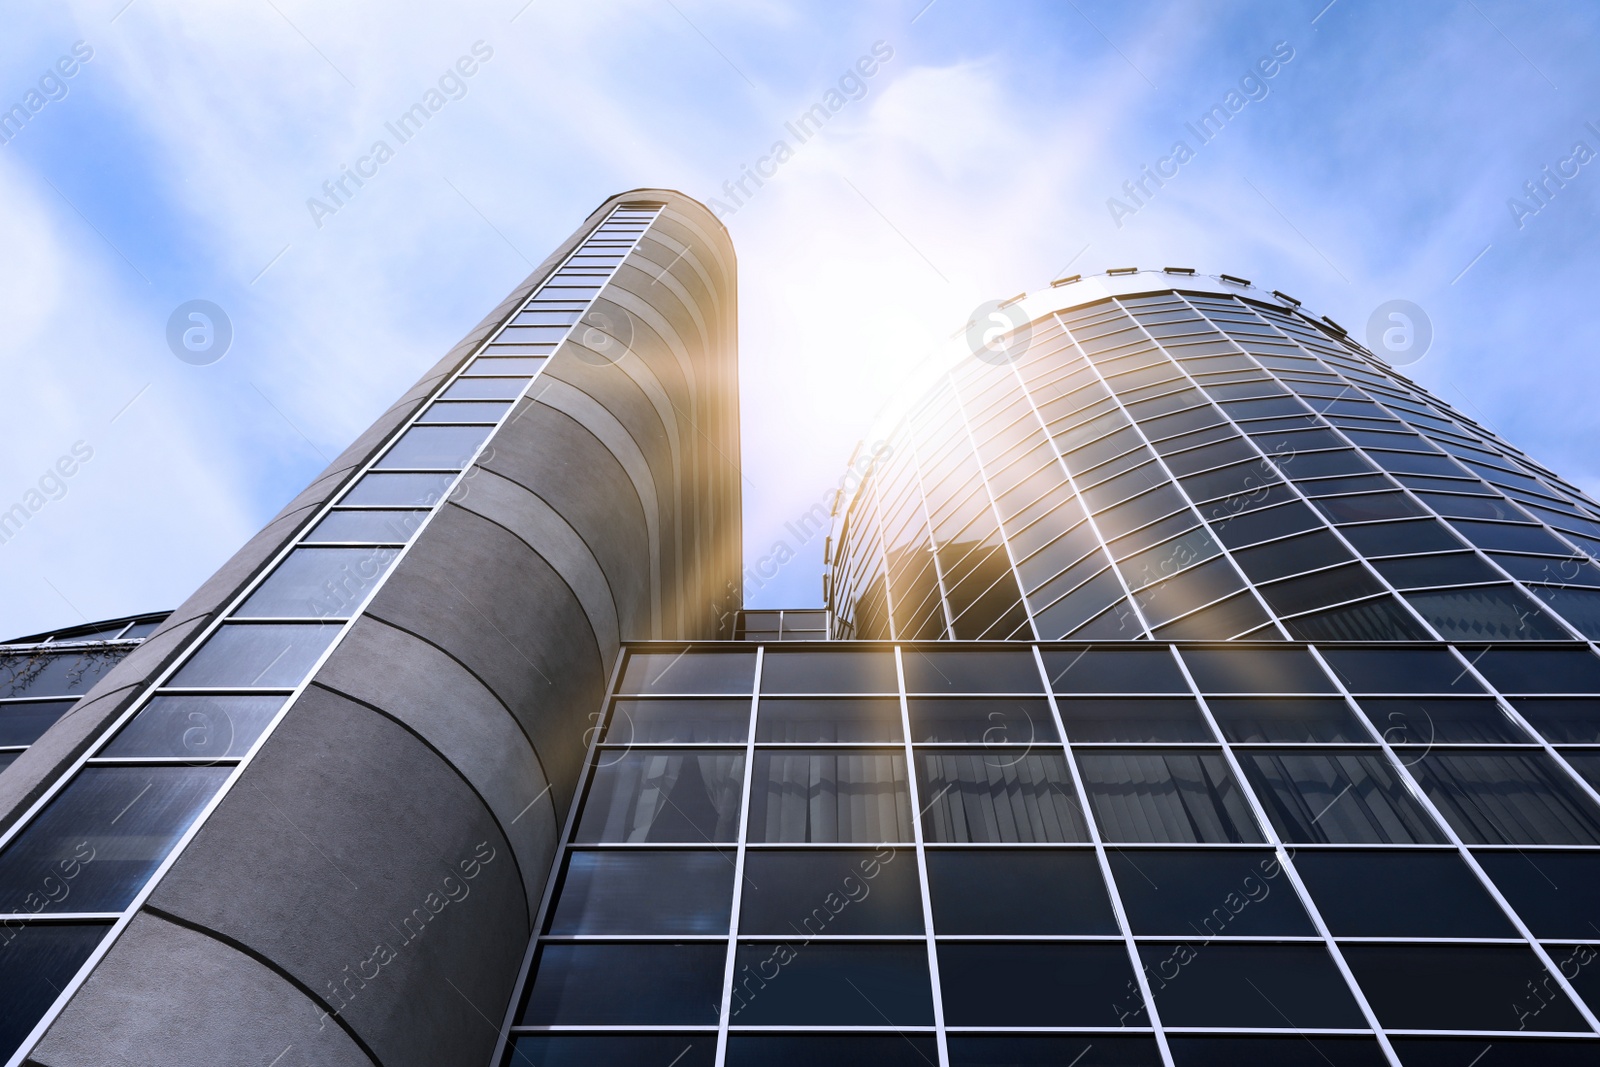 Image of Modern skyscraper with tinted windows against blue sky, low angle view. Building corporation